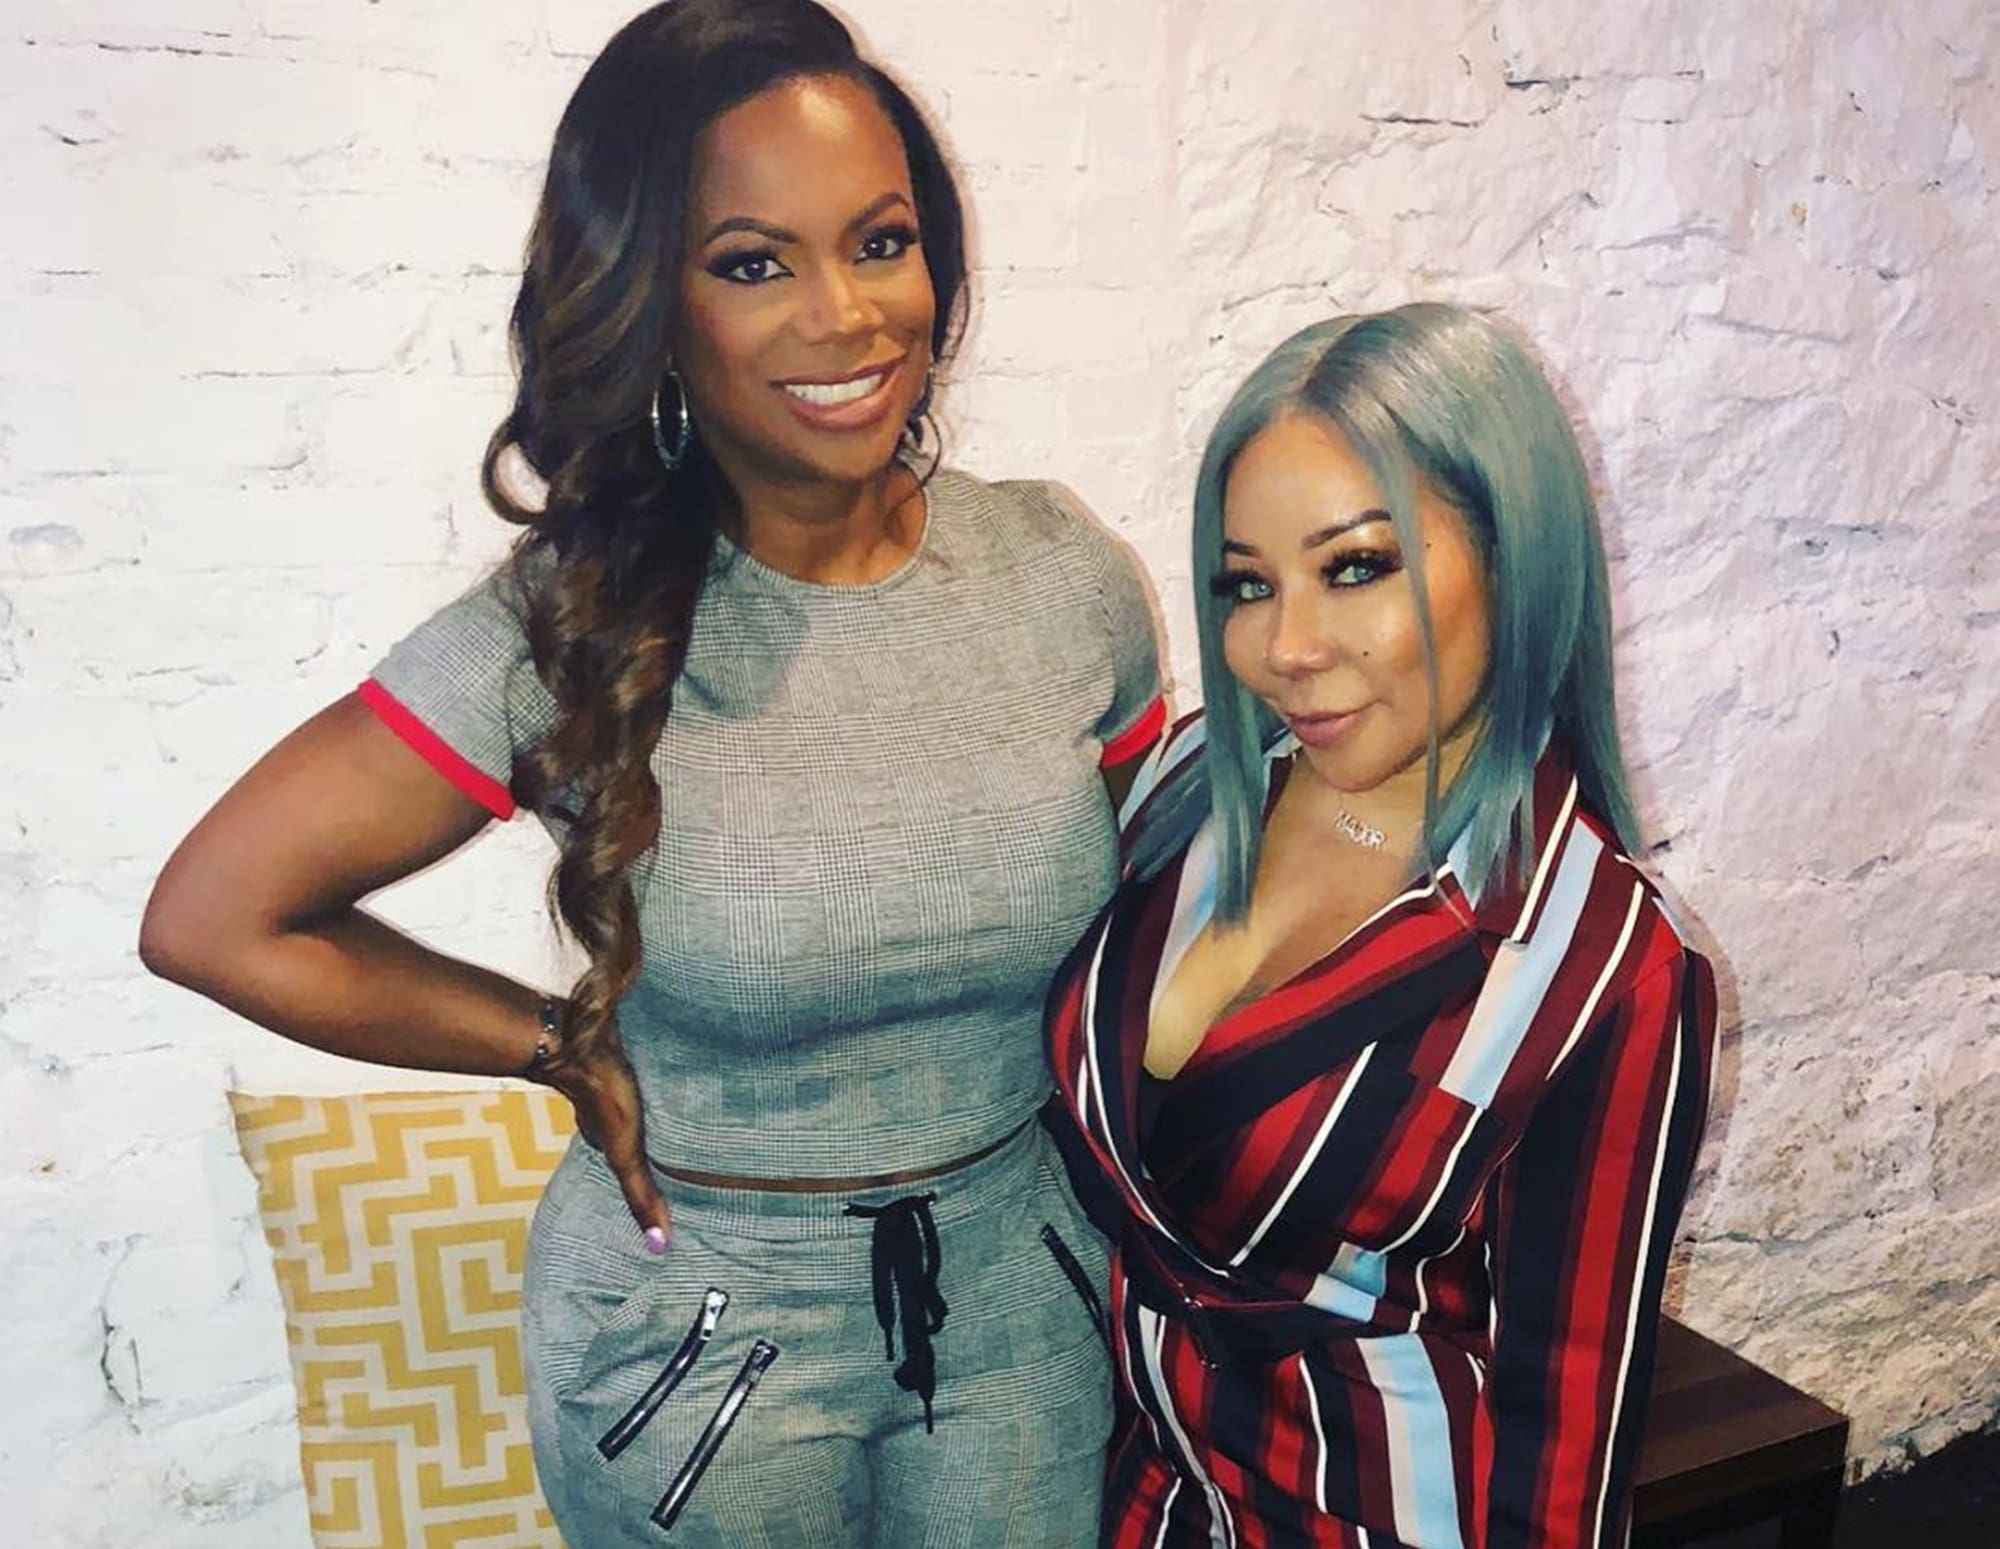 Kandi Burruss Says She Looks Like A Tom Boy In A Skirt In The Xscape Video Shared By Tiny Harris